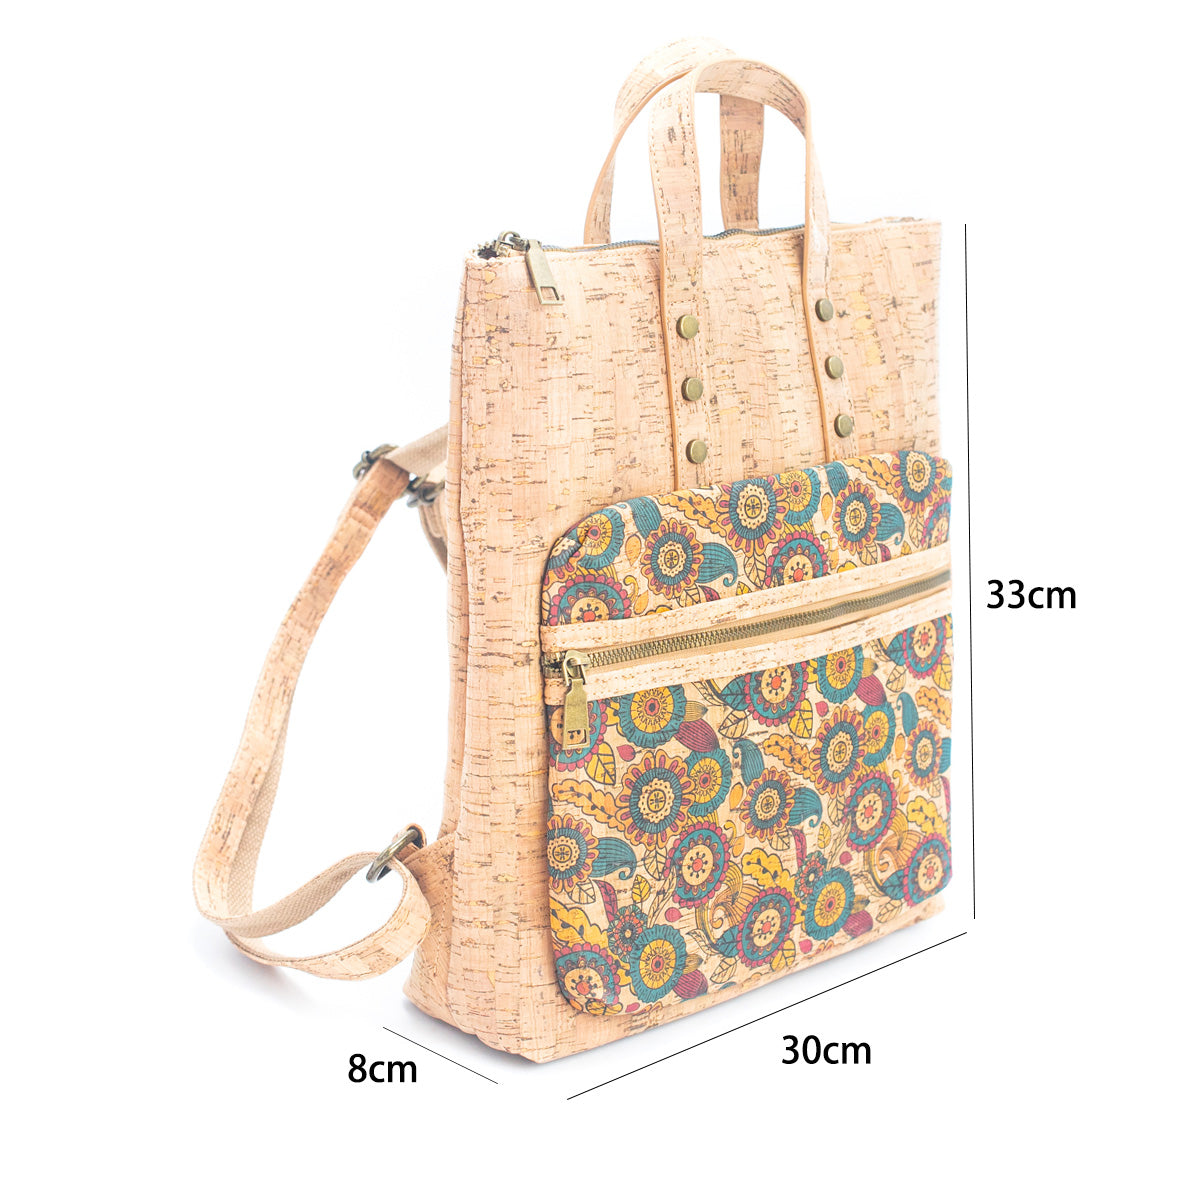 Cork Women's Hand-carry Vegan Backpack | THE CORK COLLECTION